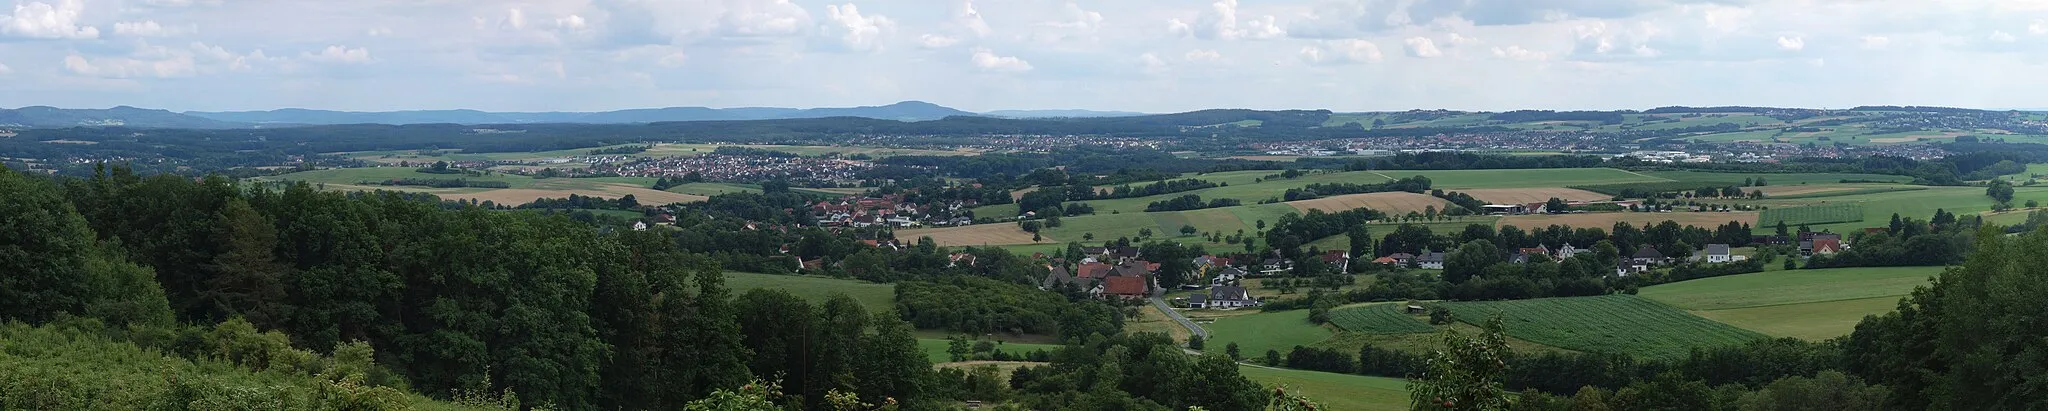 Photo showing: A panorama taken from a viewpoint close to Oberlindelbach, a village of Igensdorf, a town in northern Bavaria. It shows the following villages and towns. (Please see image annotations for locations):
Etlaswind, in the right foreground
Pettensiedel, in the center
Büg, behind Pettensiedel and to the left
Forth, to the left of Büg
Ebach, at the far left, surrounded by forest
Eckenhaid, in the center background
Eschenau, to the right of Eckenhaid, with an industrial park in the foreground
Beerbach, on the hill crest behind Eschenau
Brand, to the right of Eschenau, also with an industrial park in the foreground
Kleingeschaidt, on the hill crest behind Brand
Großgeschaidt, on the hillside to the right of Kleingeschaidt
The mountain in the center background is the Moritzberg.